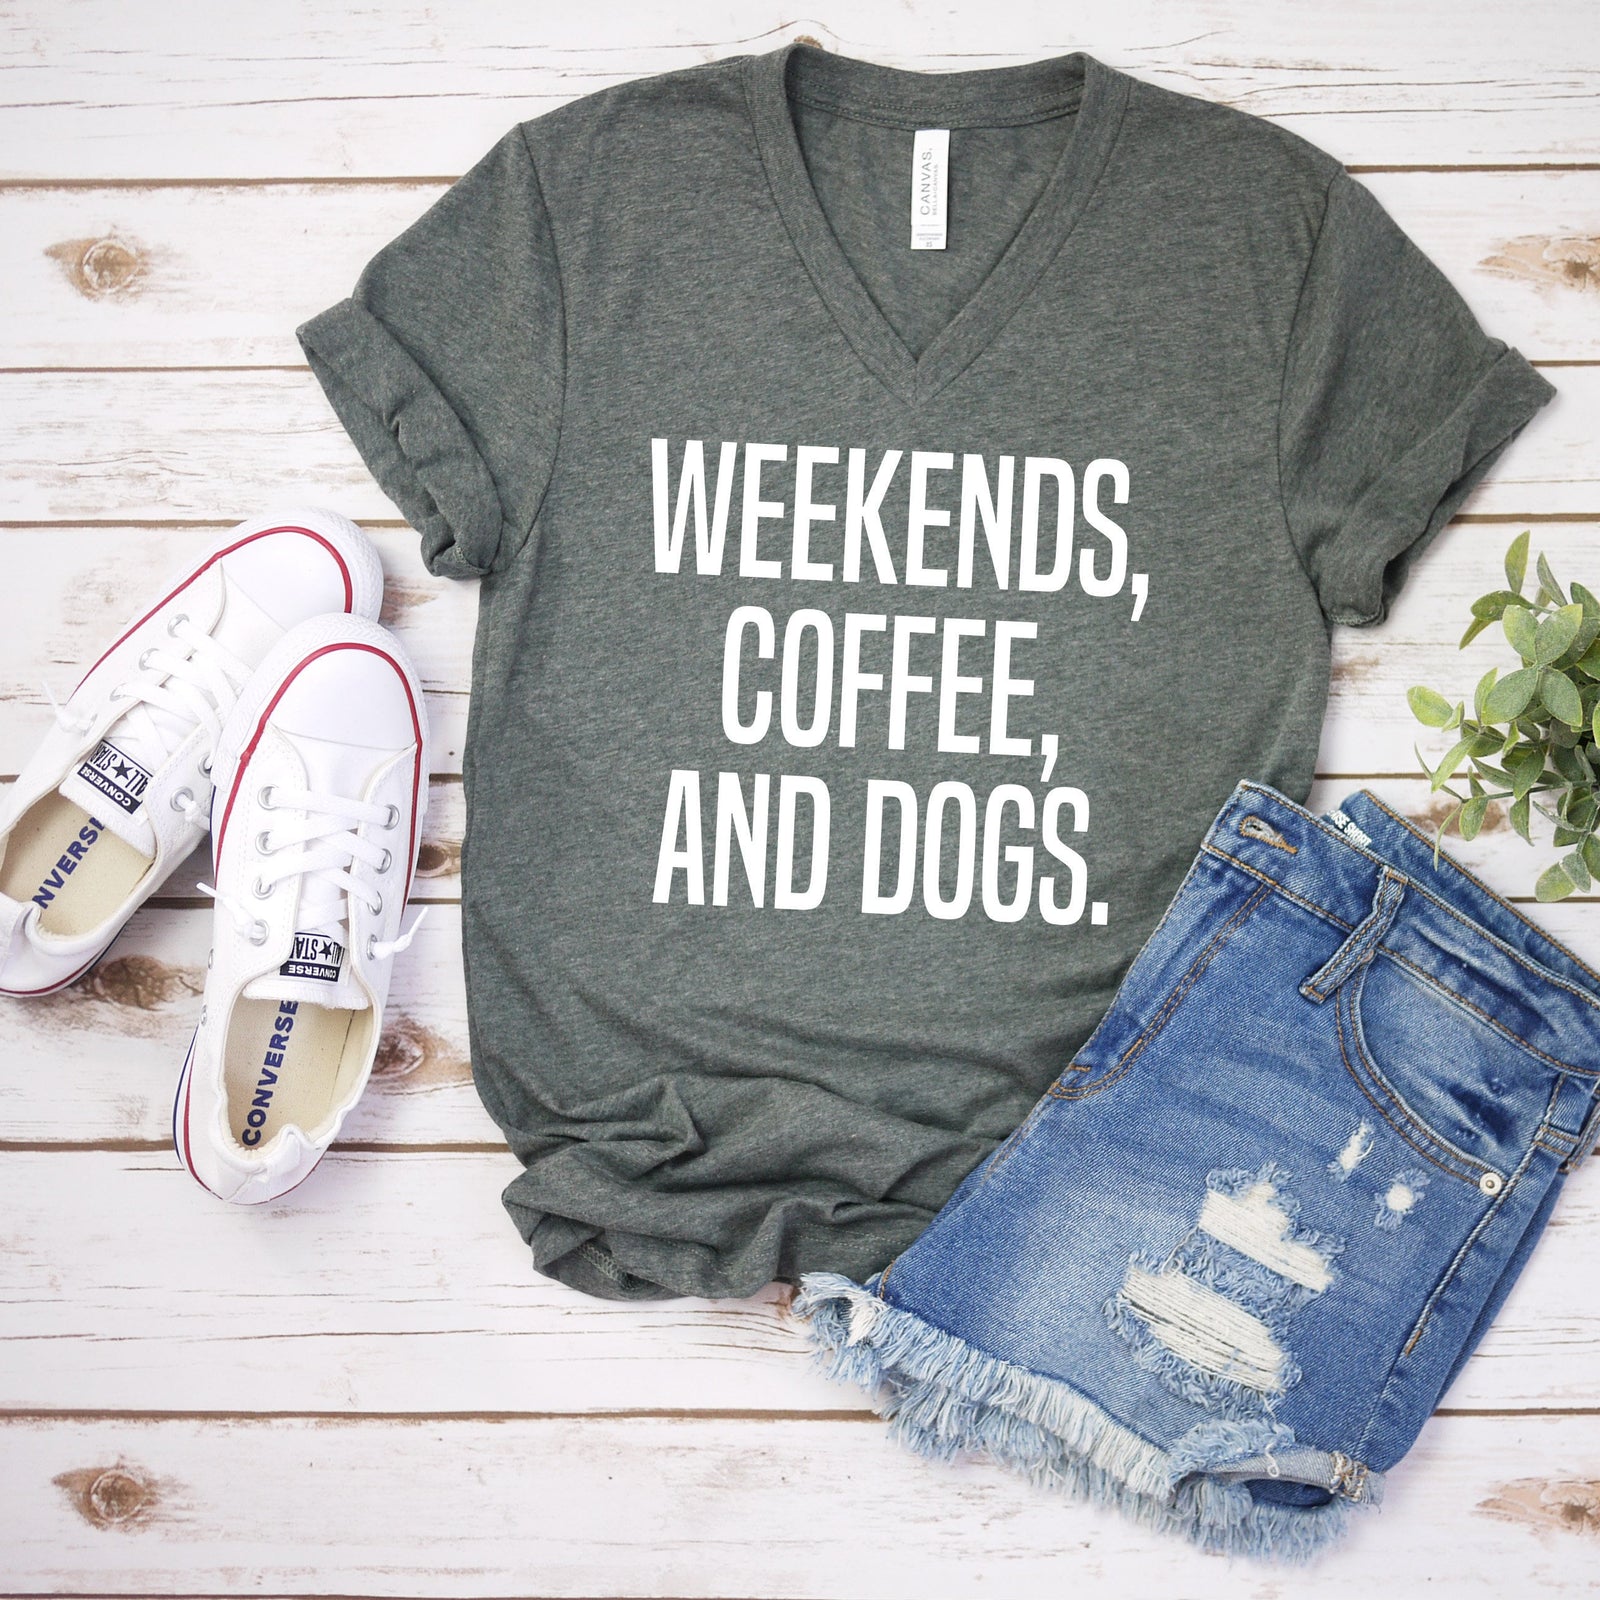 Weekends Coffee and Dogs T Shirt - Dog Coffee Lover Shirt- Pet Rescue T Shirt - Funny Dog Mom Shirt